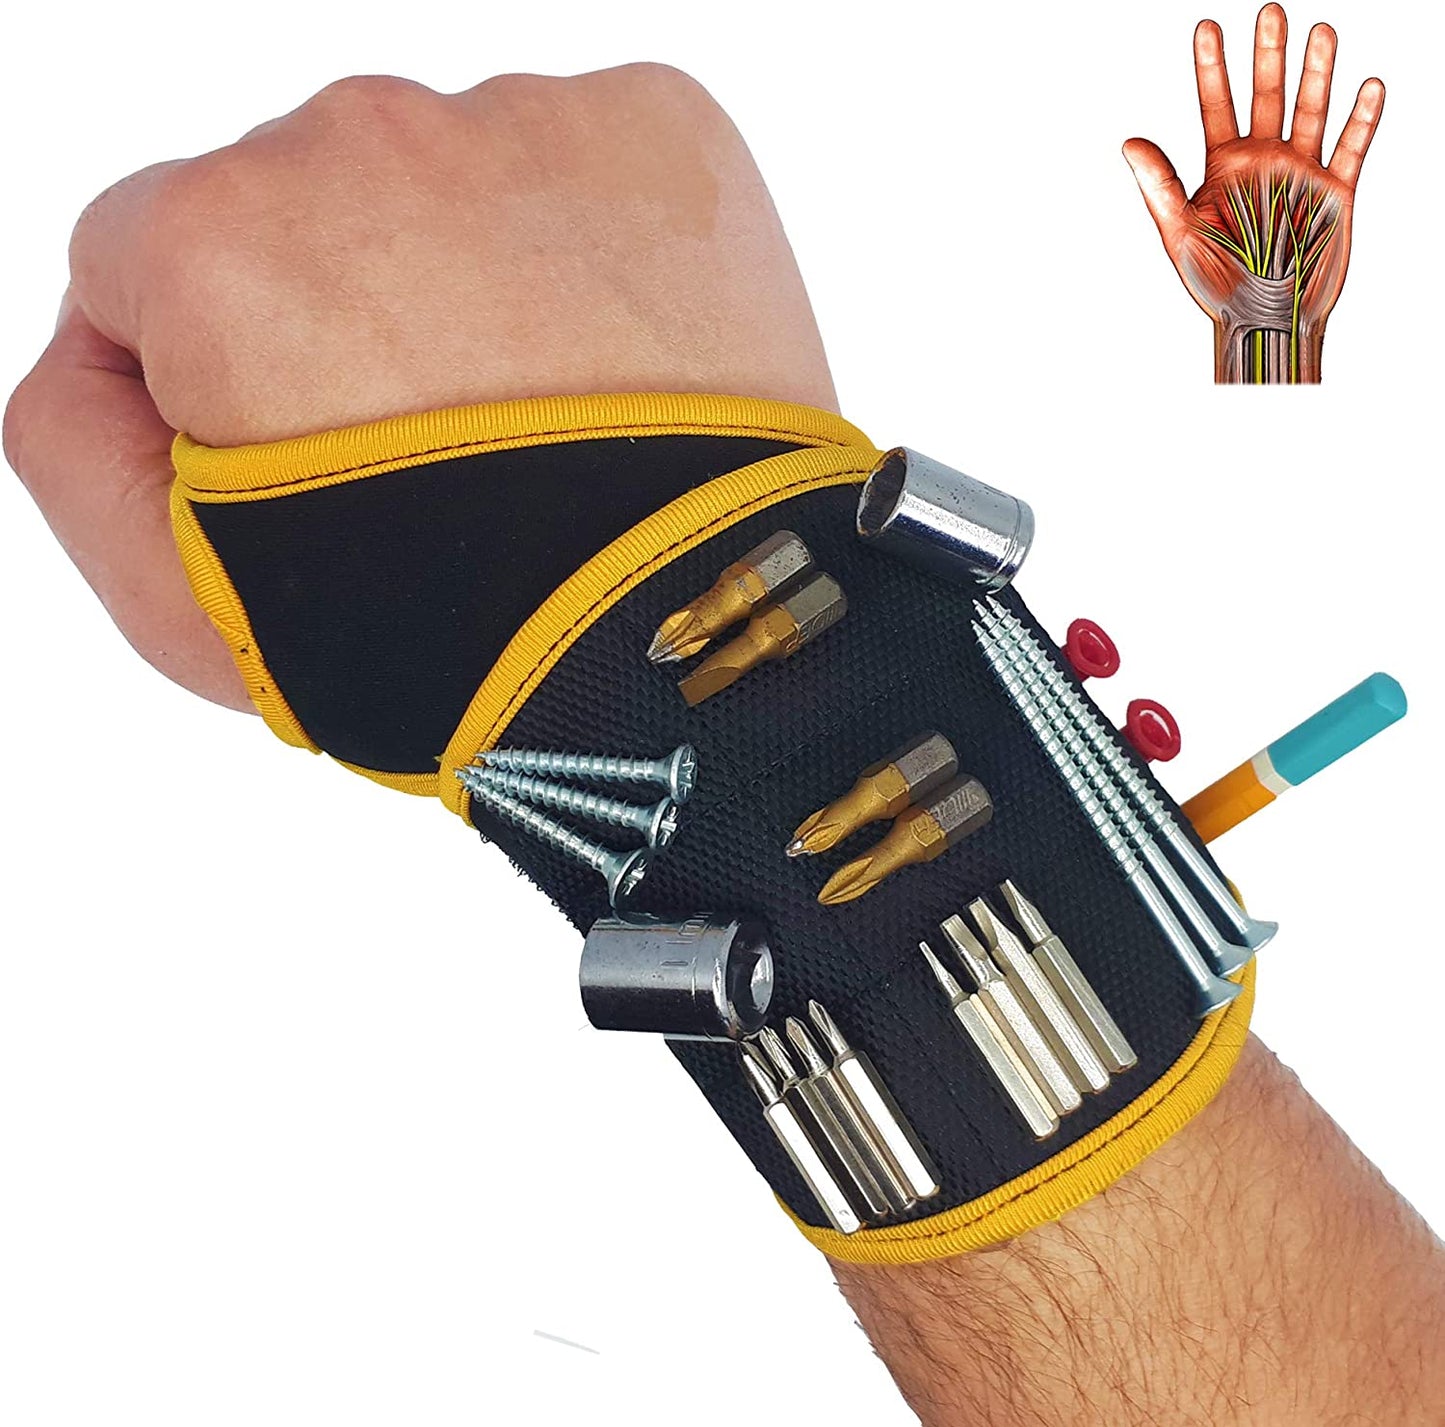 Magnetic Wristband With Super Strong Magnets Holds Screws, Nails, Drill Bit. Unique Wrist Support Design Cool Handy Gadget Gift for Fathers, Boyfriends, Handyman, Electrician, Contractor